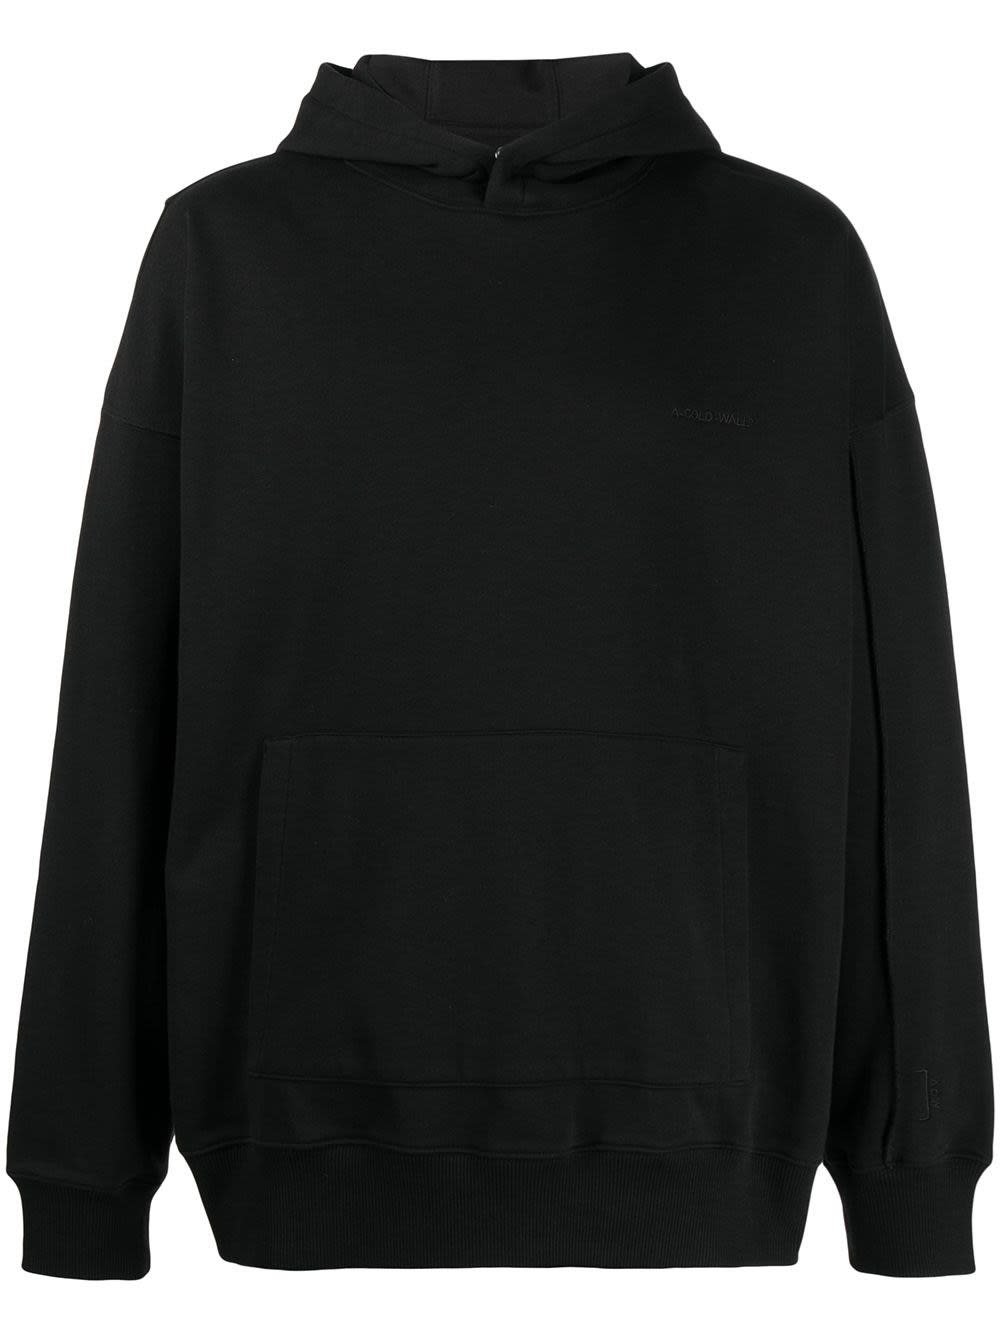 A-COLD-WALL* DISSECTION HOODIE IN BLACK JERSEY,11806101